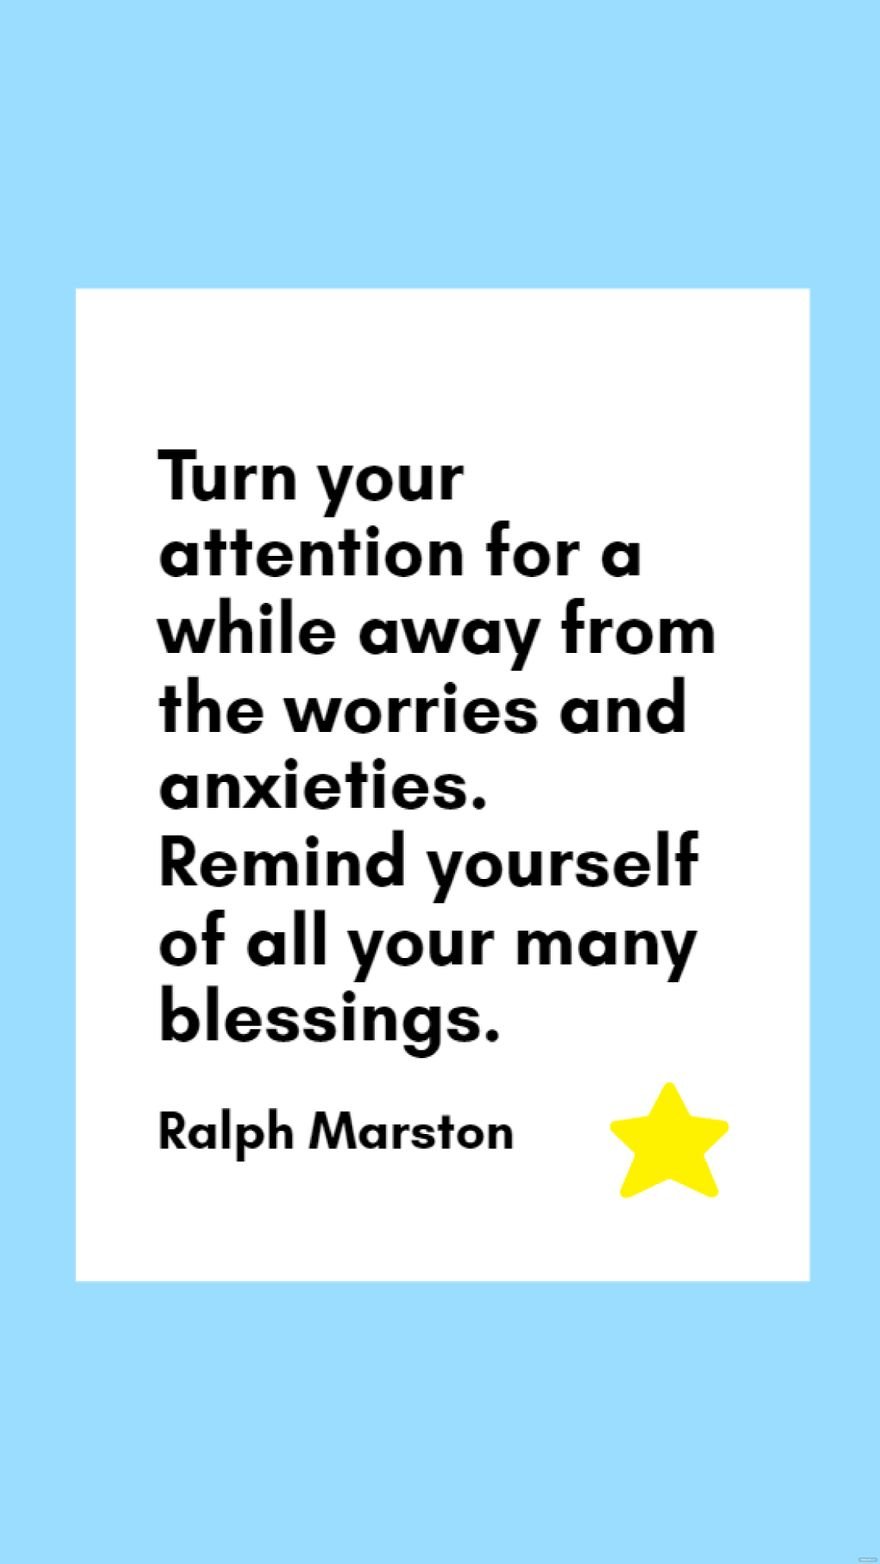 Ralph Marston - Turn your attention for a while away from the worries and anxieties. Remind yourself of all your many blessings.